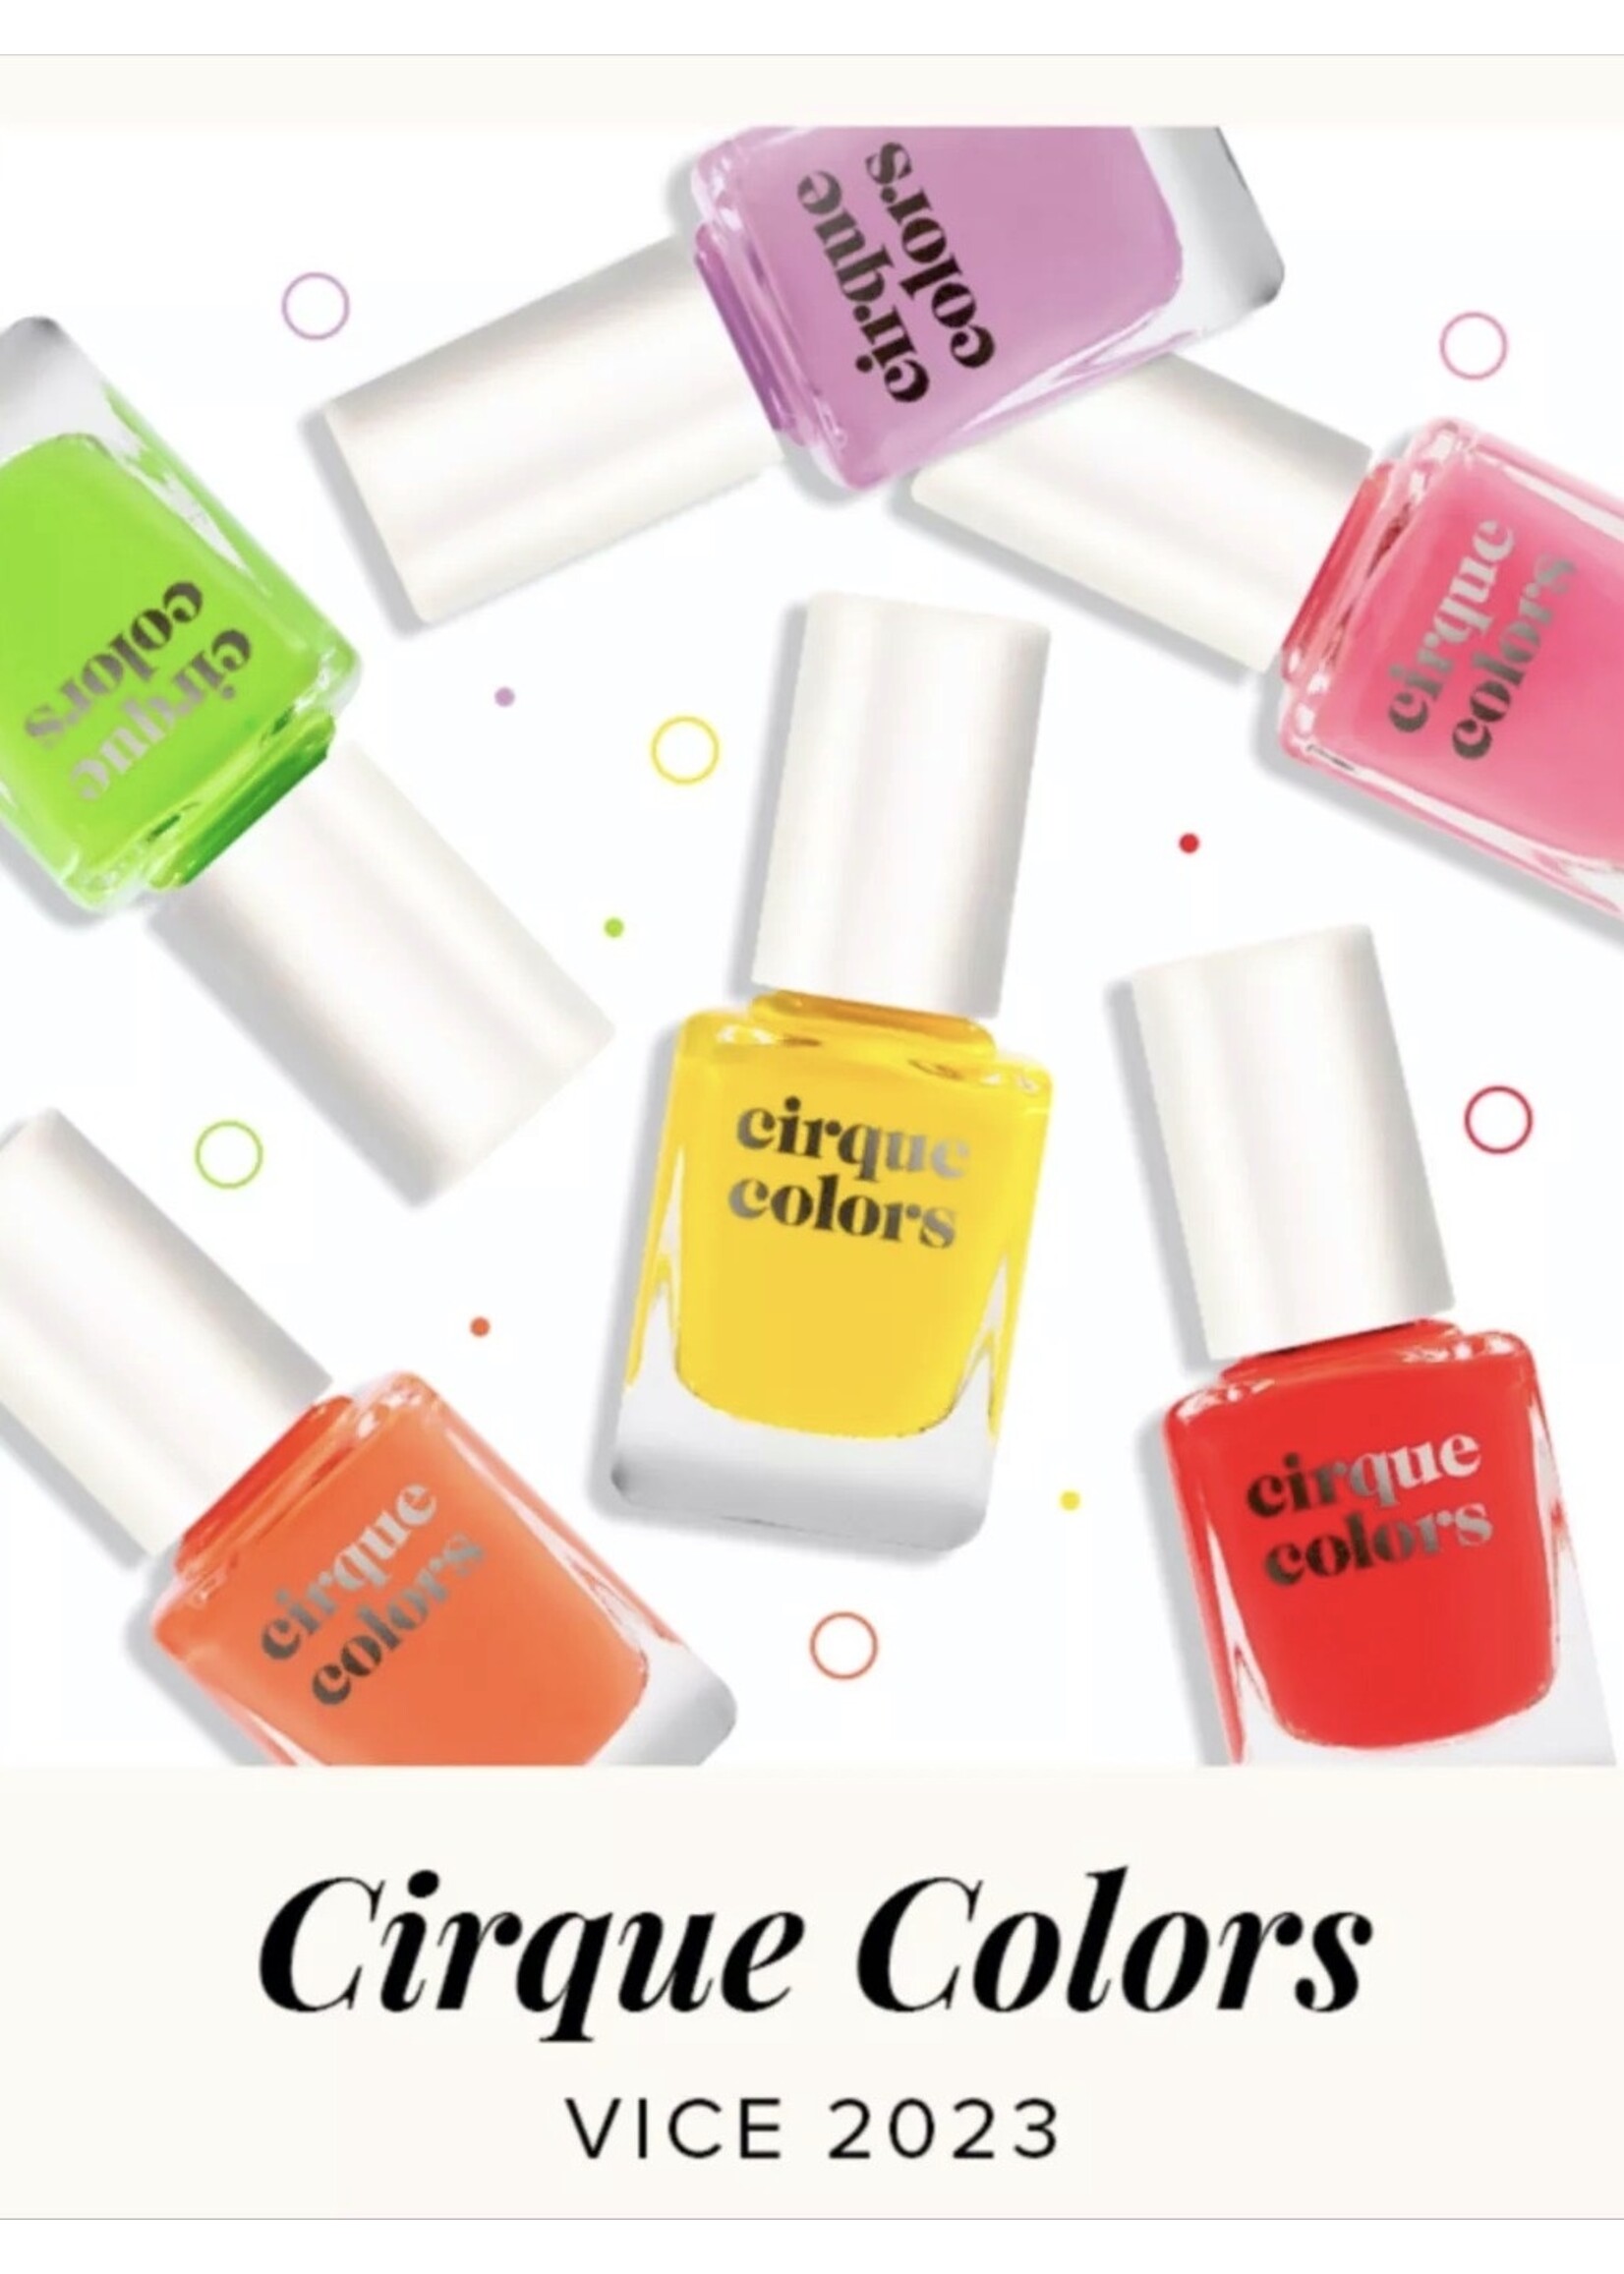 Cirque Colors Nail polishes "Vice 2023" by Cirque Colors